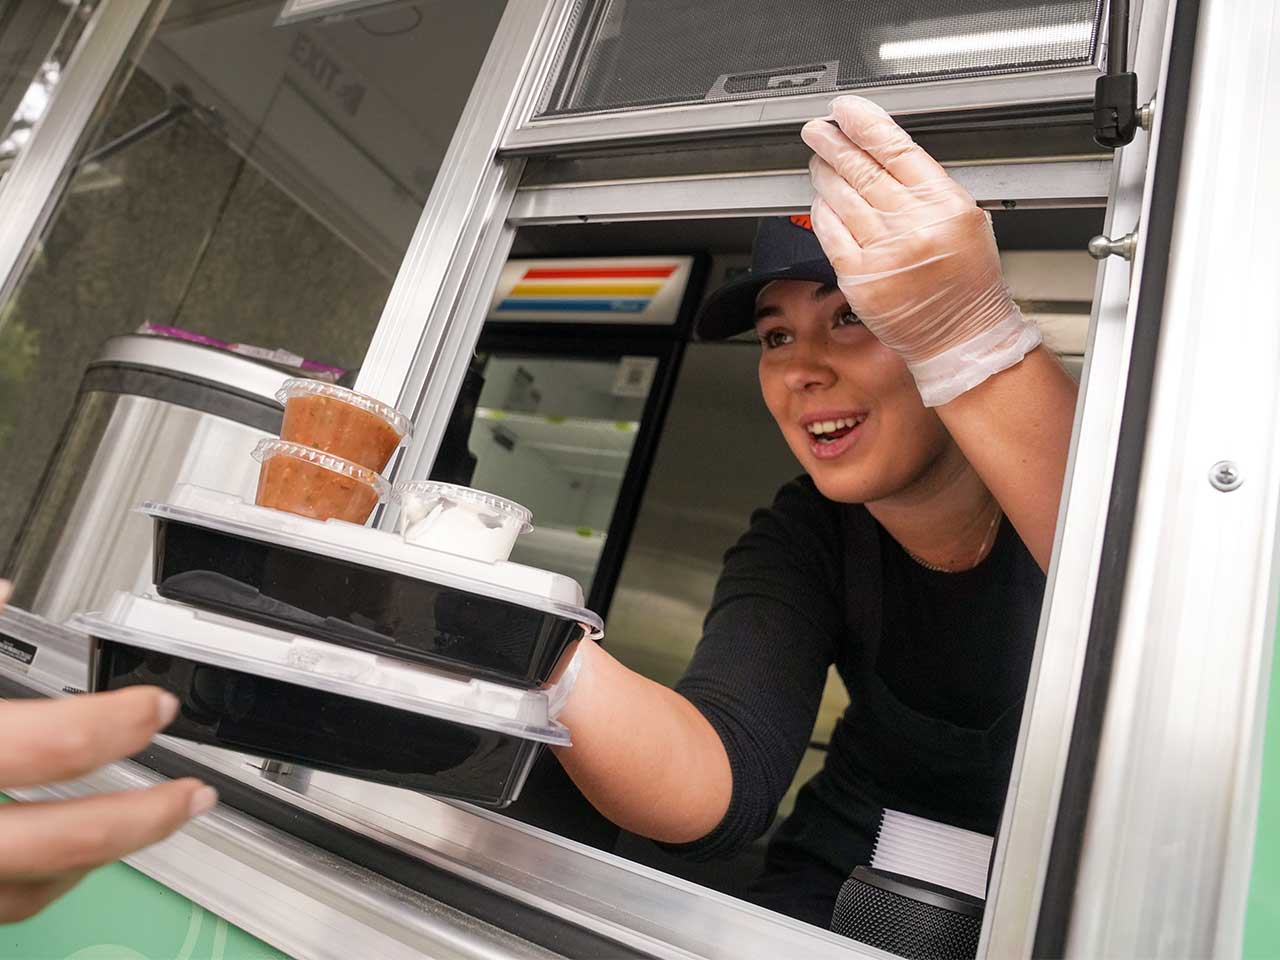 Food science major Bianca Tomad serving food in the Aggie Eats Food Truck at UC Davis.